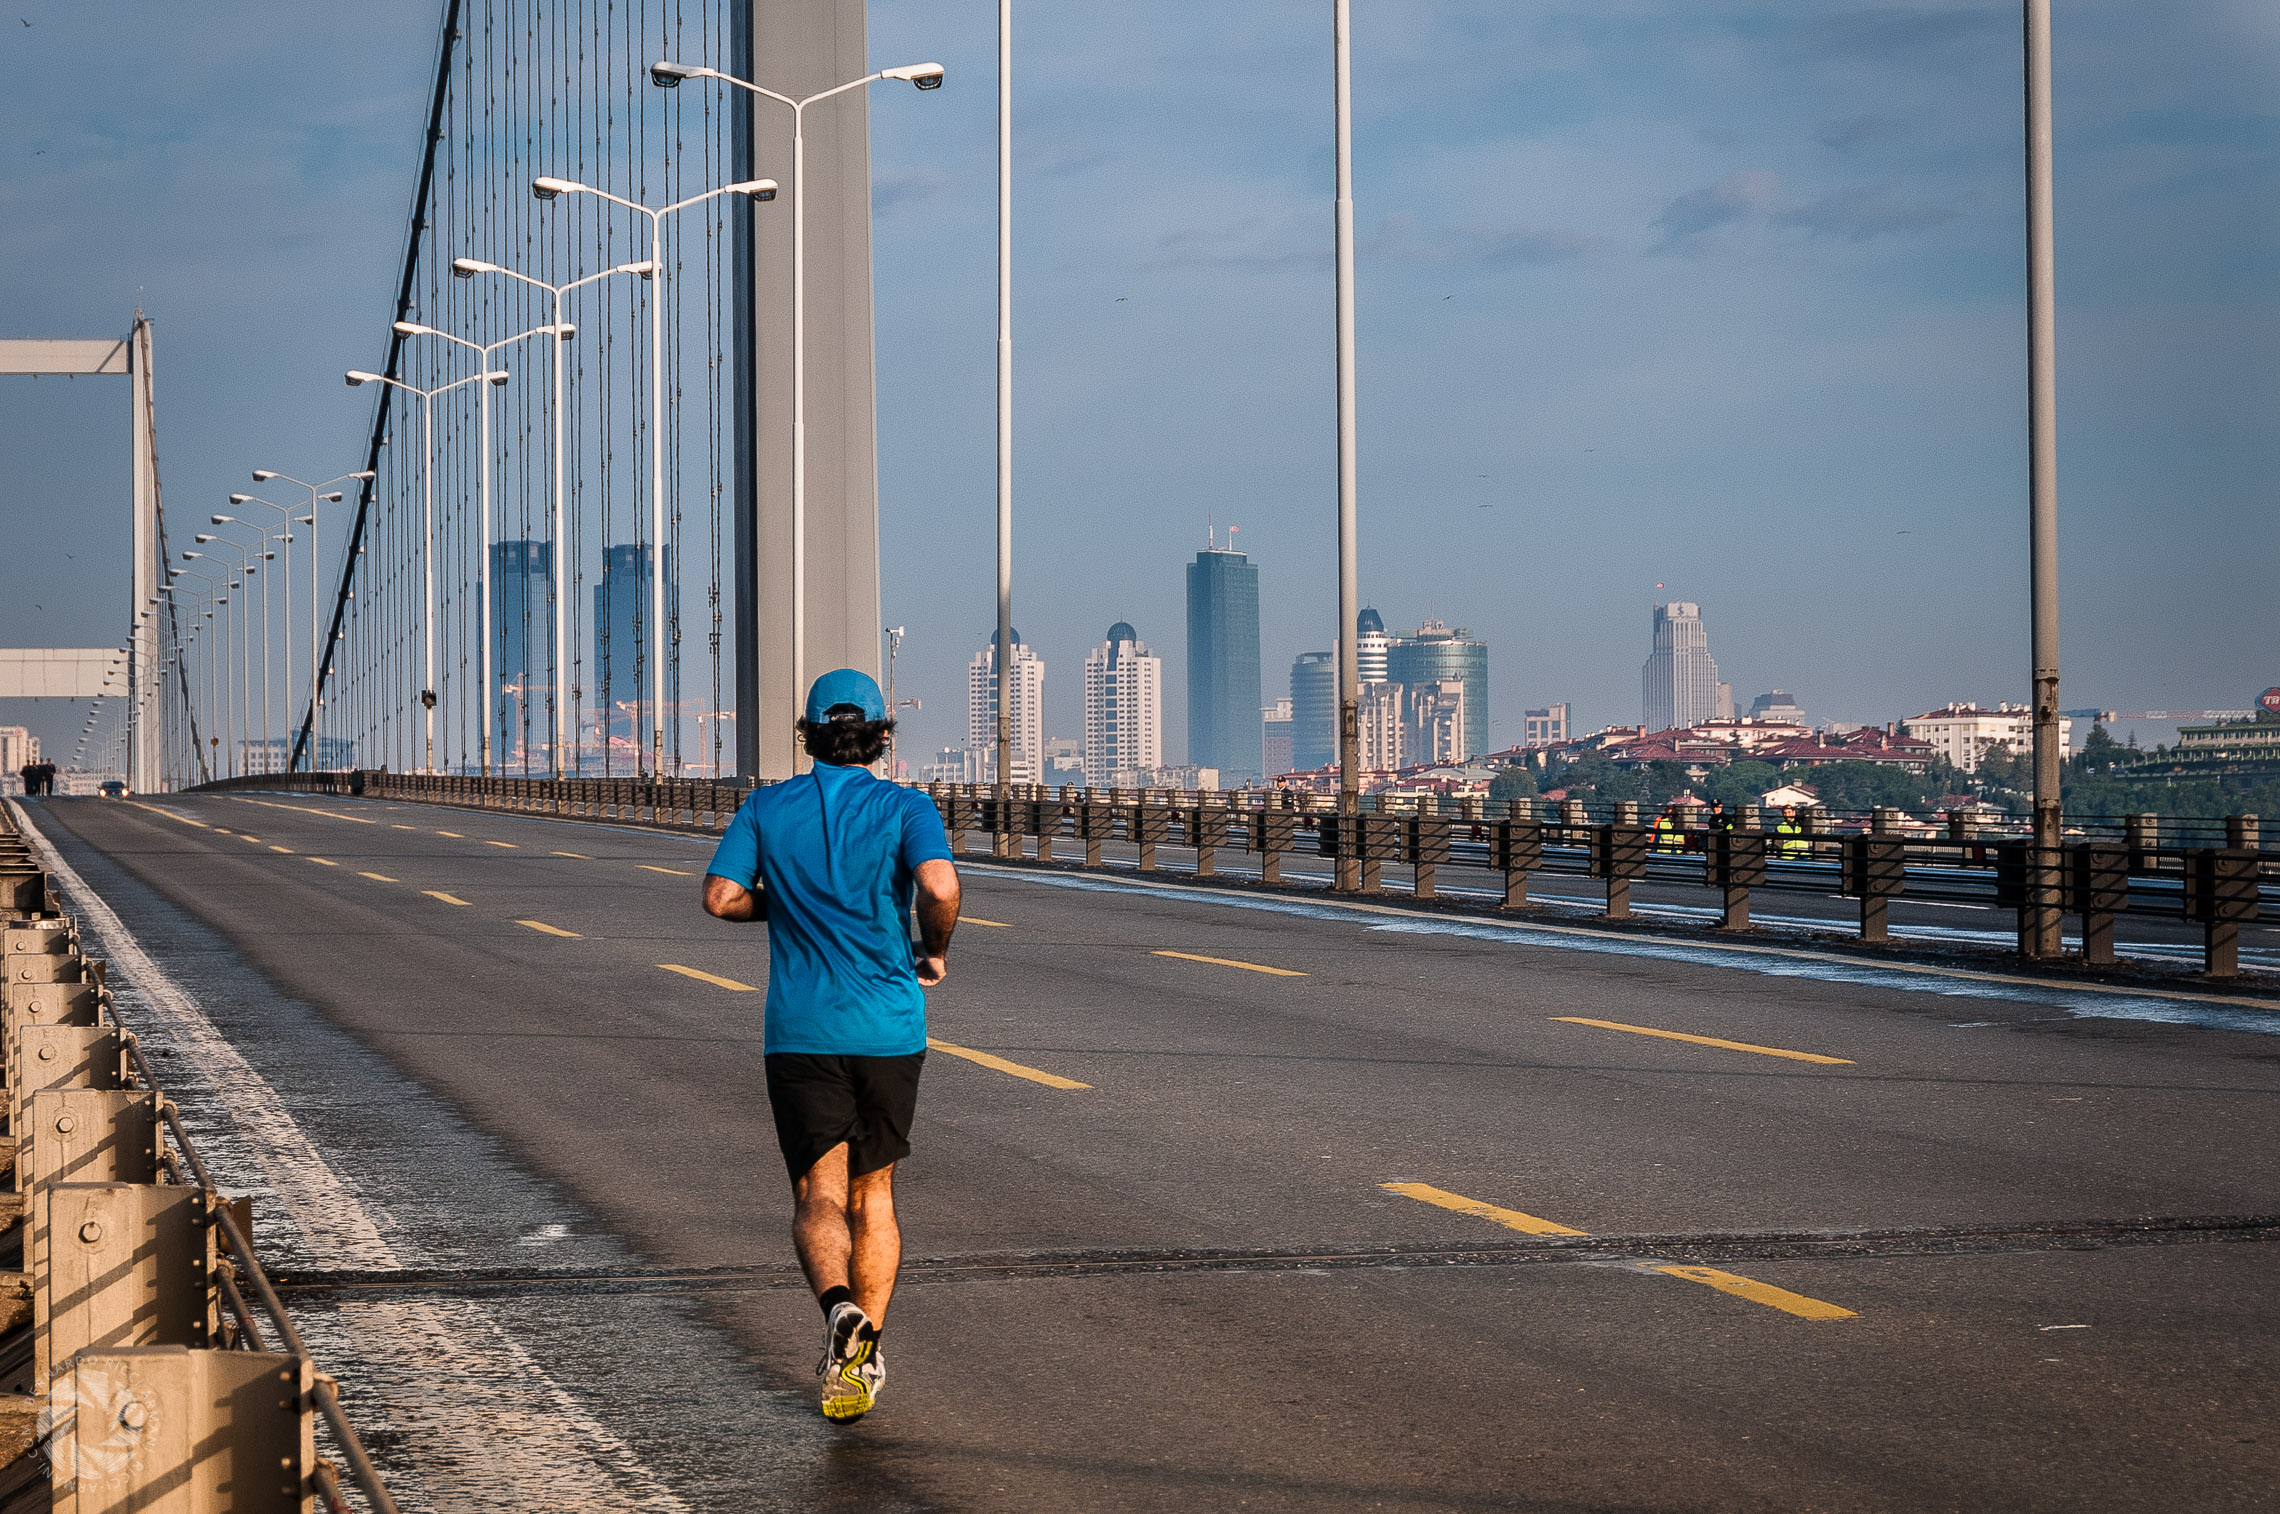 The Lonely Runner (Istanbul Marathon) | Photographing Around Me